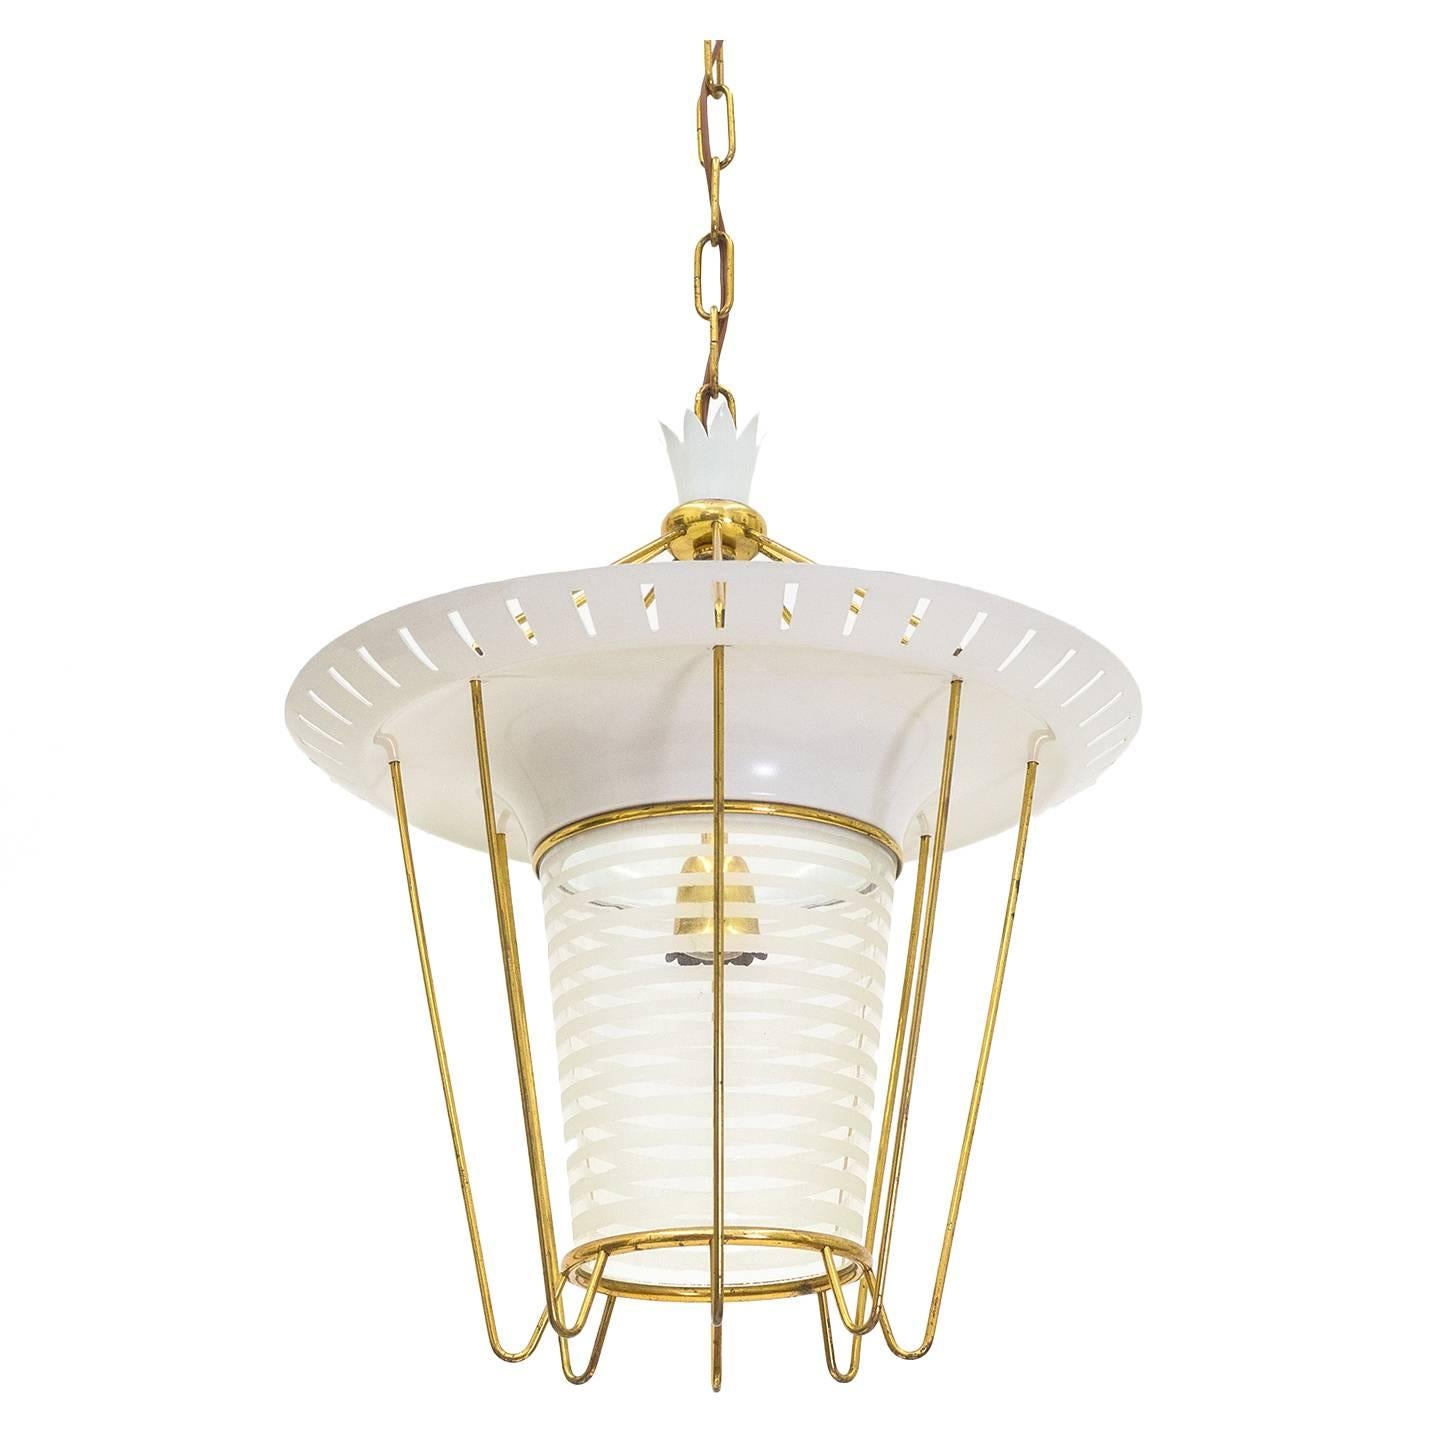 Italian 1950s Lantern in Brass, Glass and Lacquered Aluminum